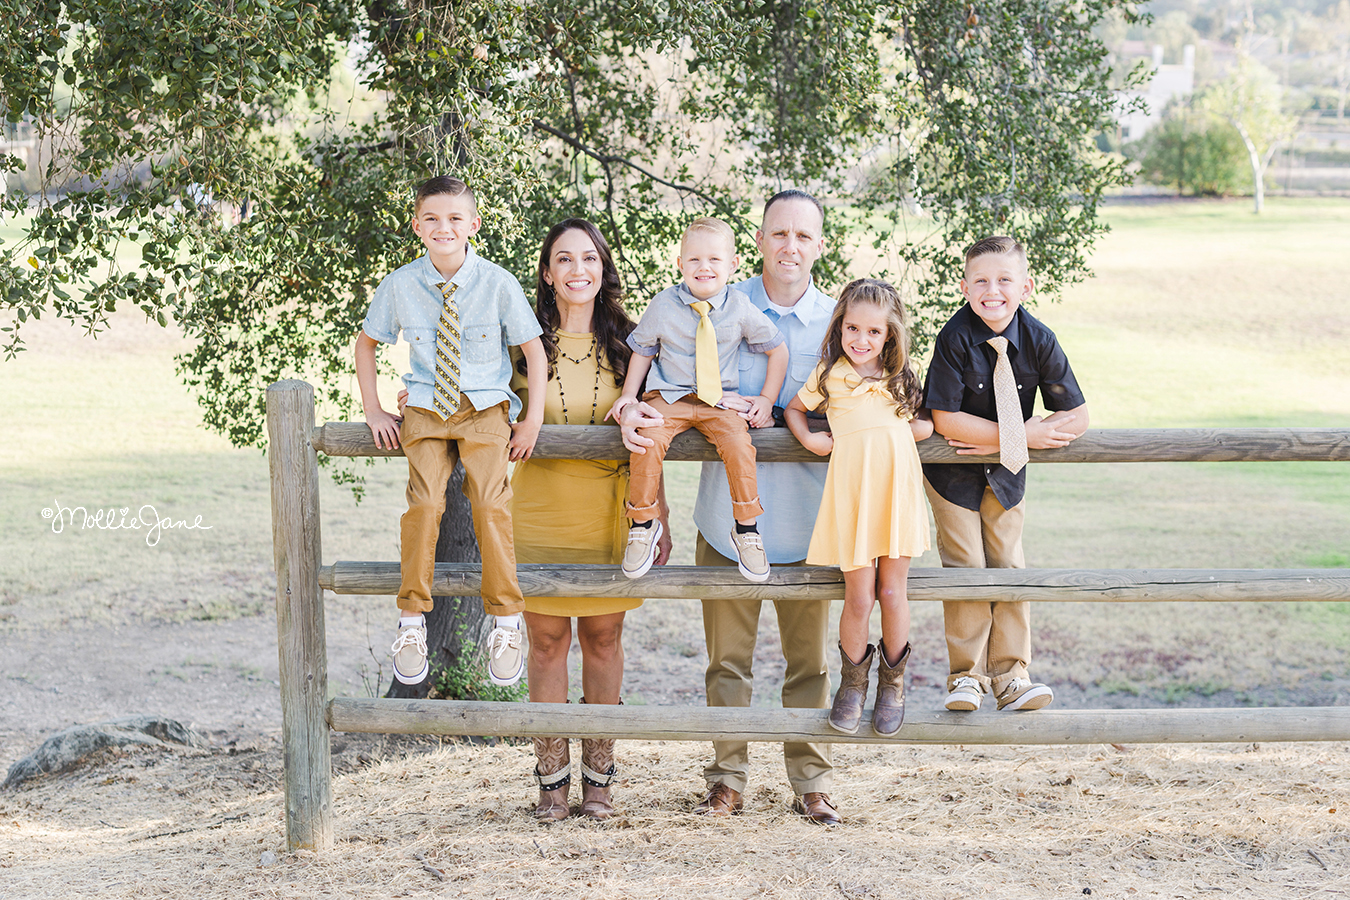 San Dimas Family Portrait Session.  Rancho Cucamonga Family Photographer.  Photographed by Mollie Jane Photography.  To see more go to www.molliejanephotography.com